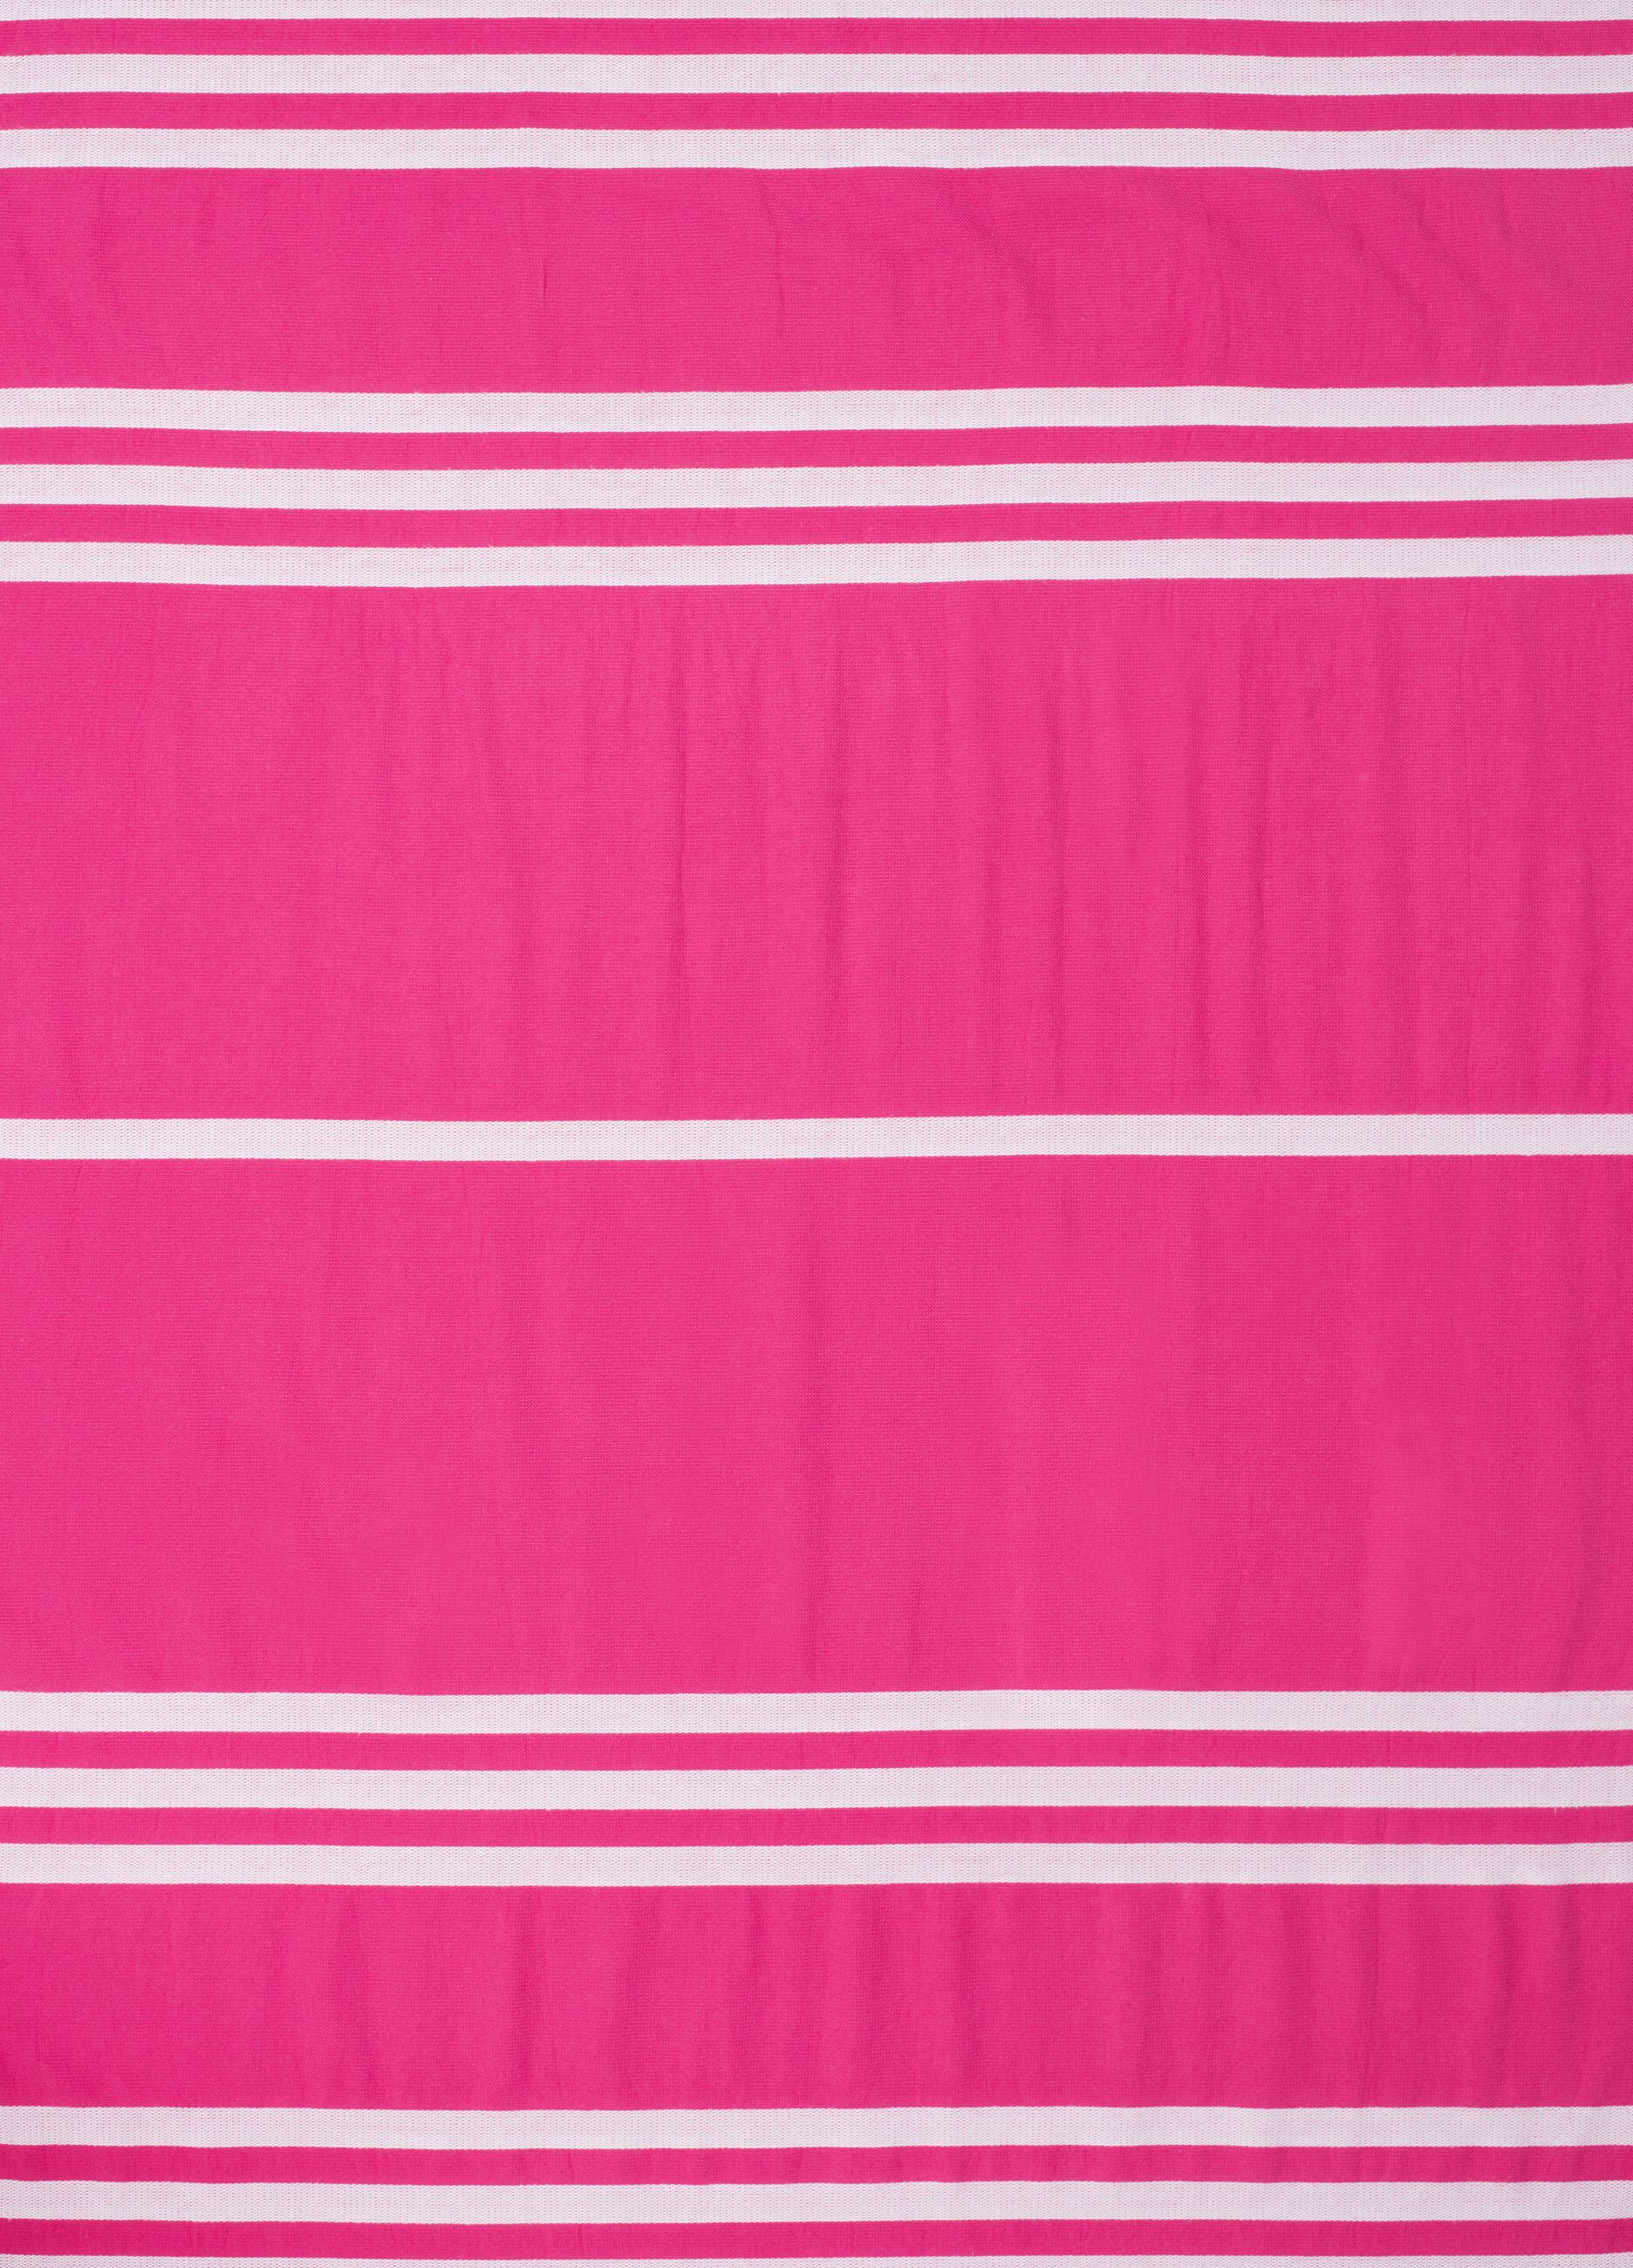 Beach towel with striped pattern.